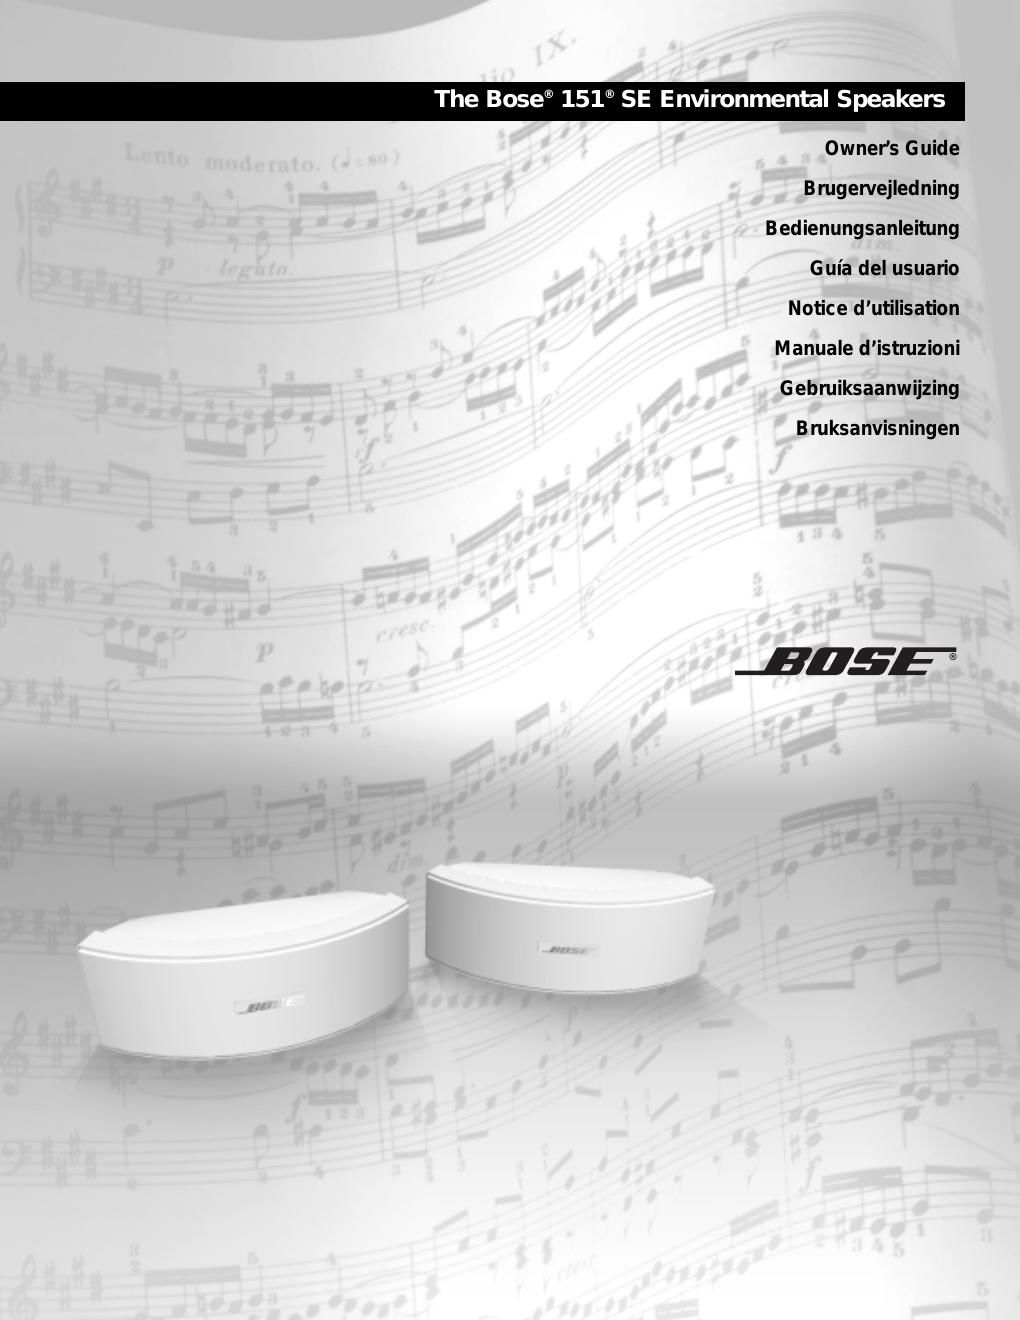 bose 151 se owners guide 2